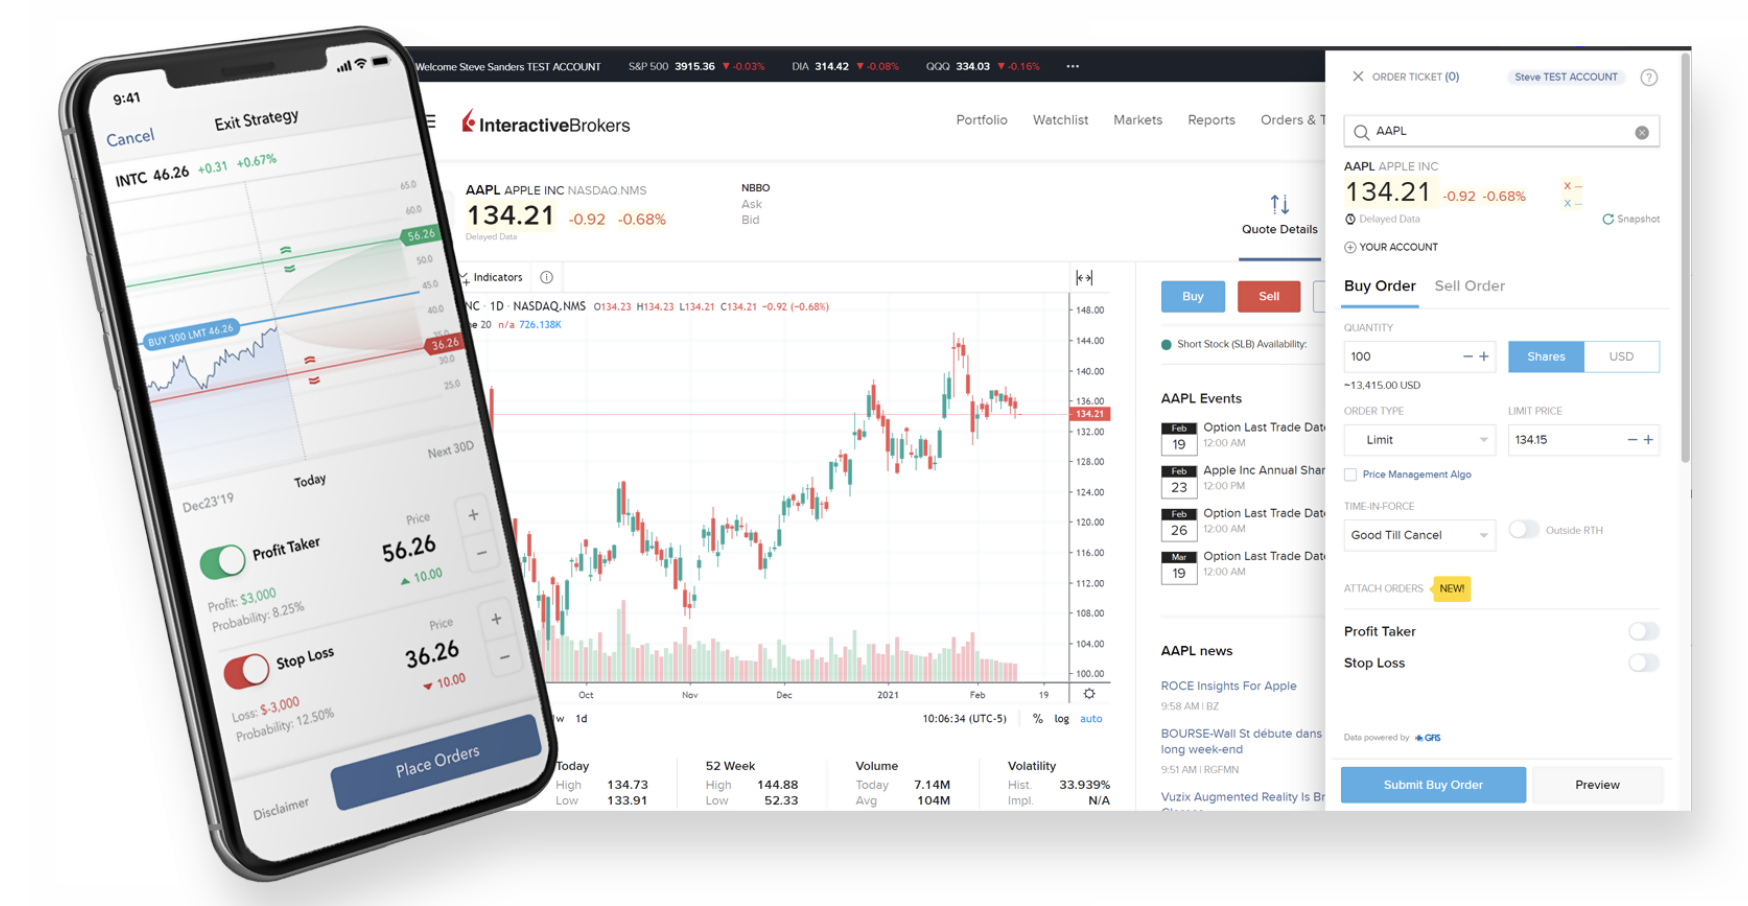 The trading platform of Interactive Brokers